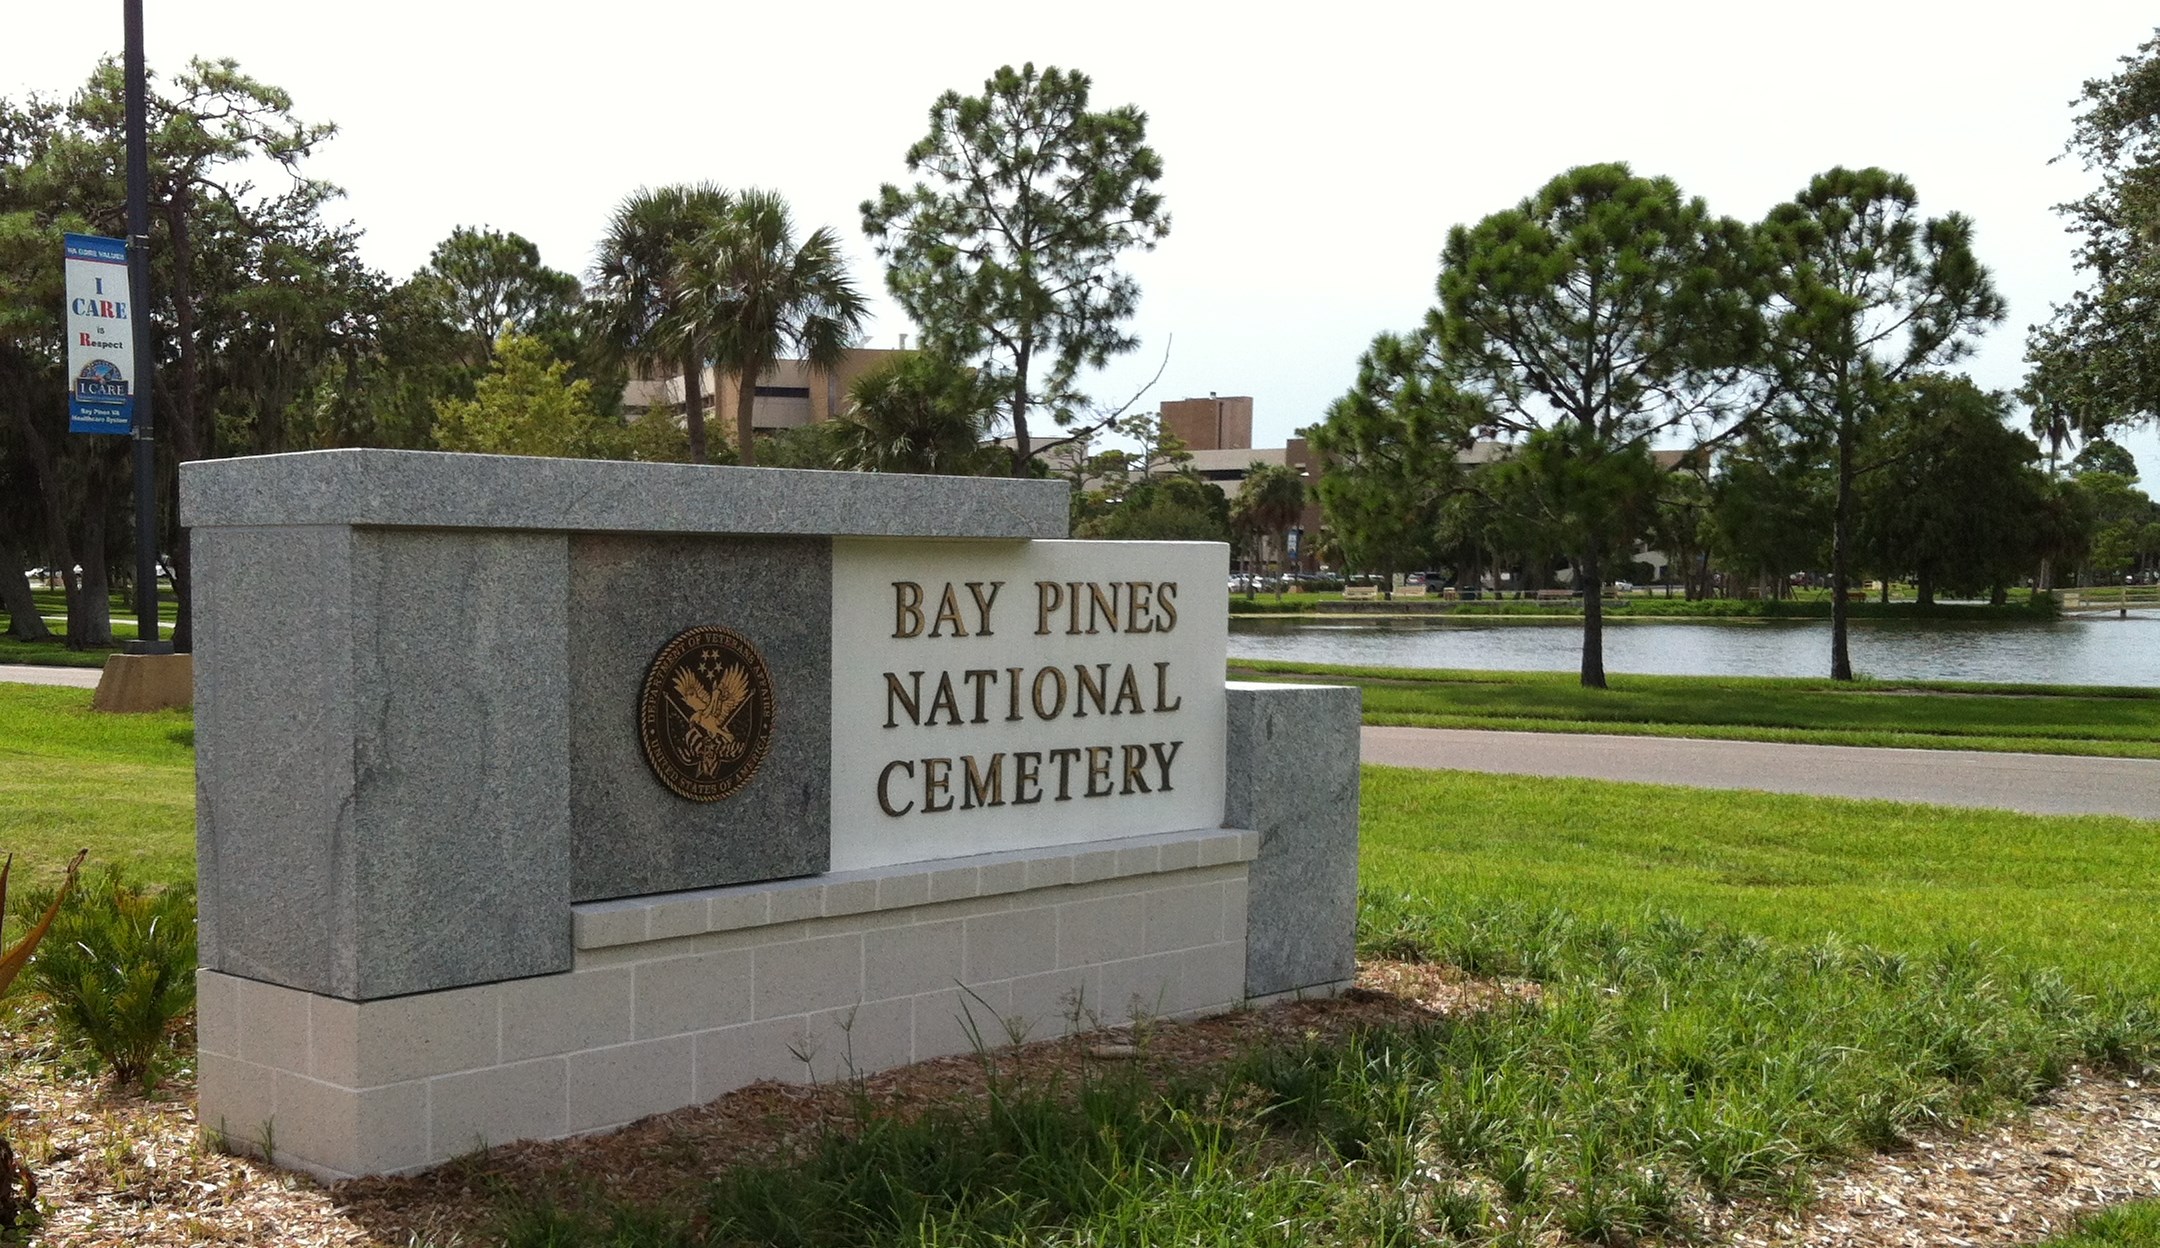 Bay Pines National Cemetery